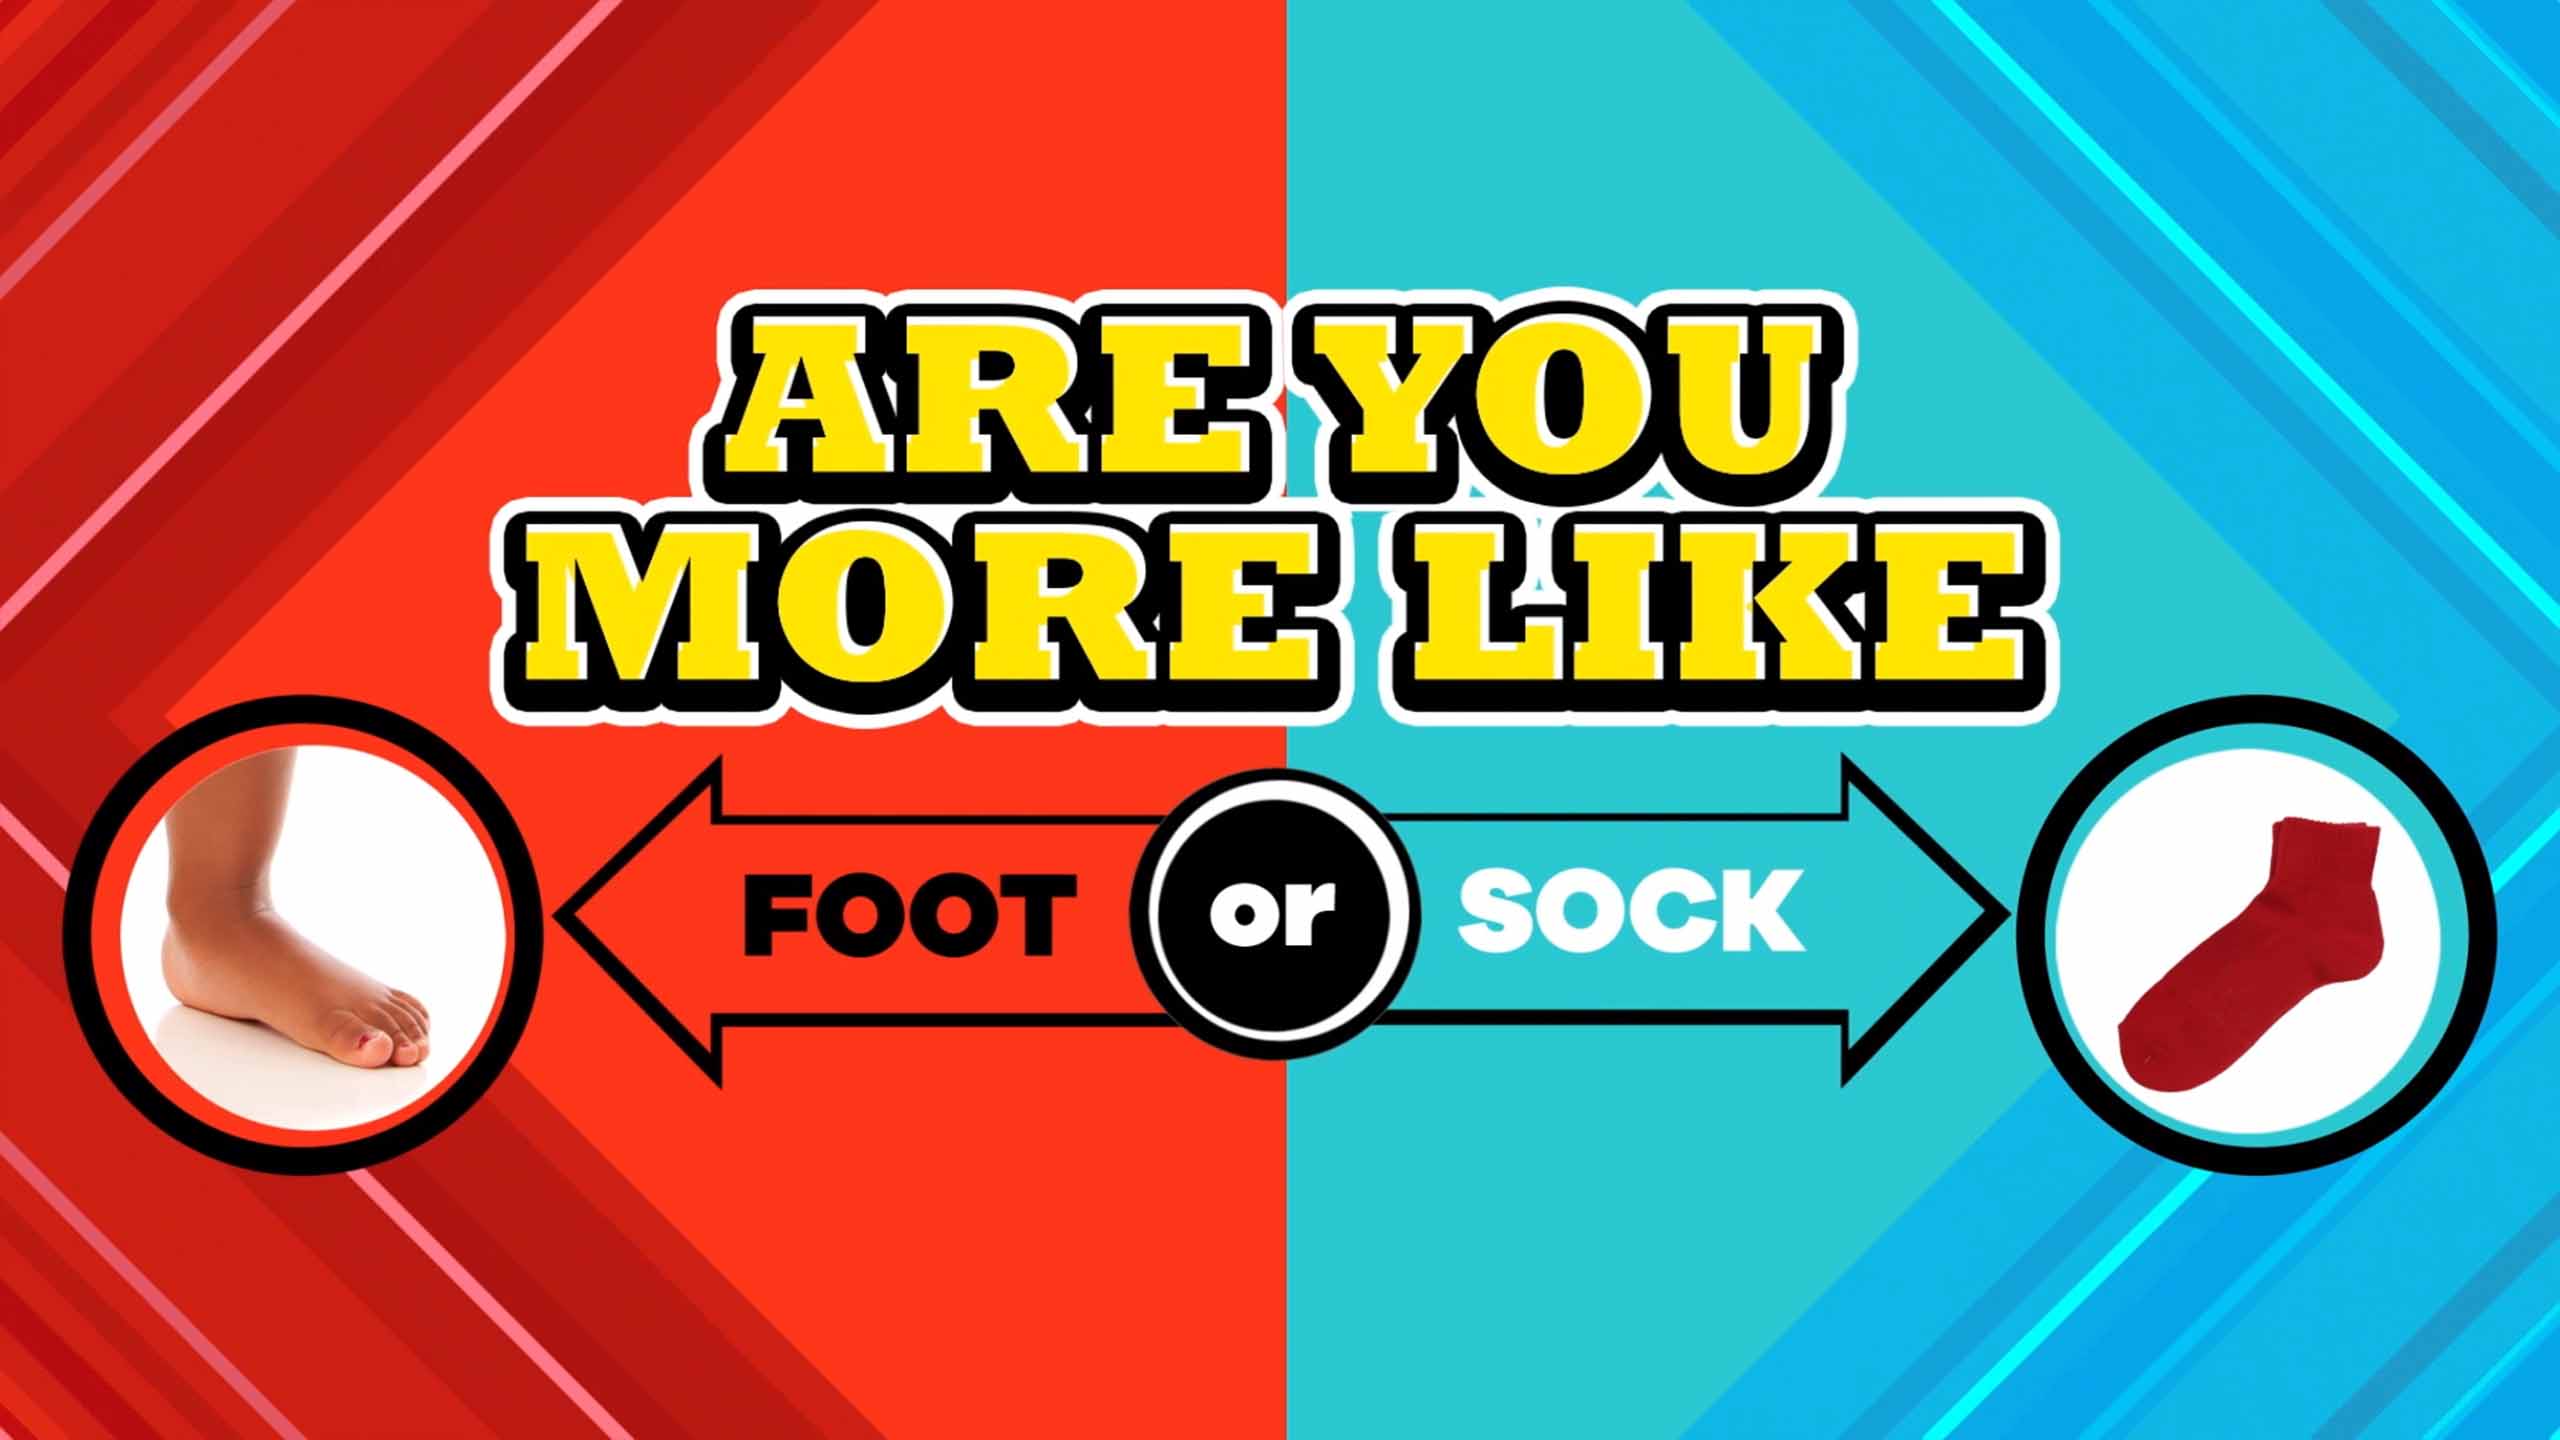 Are you more like a foot or a sock?